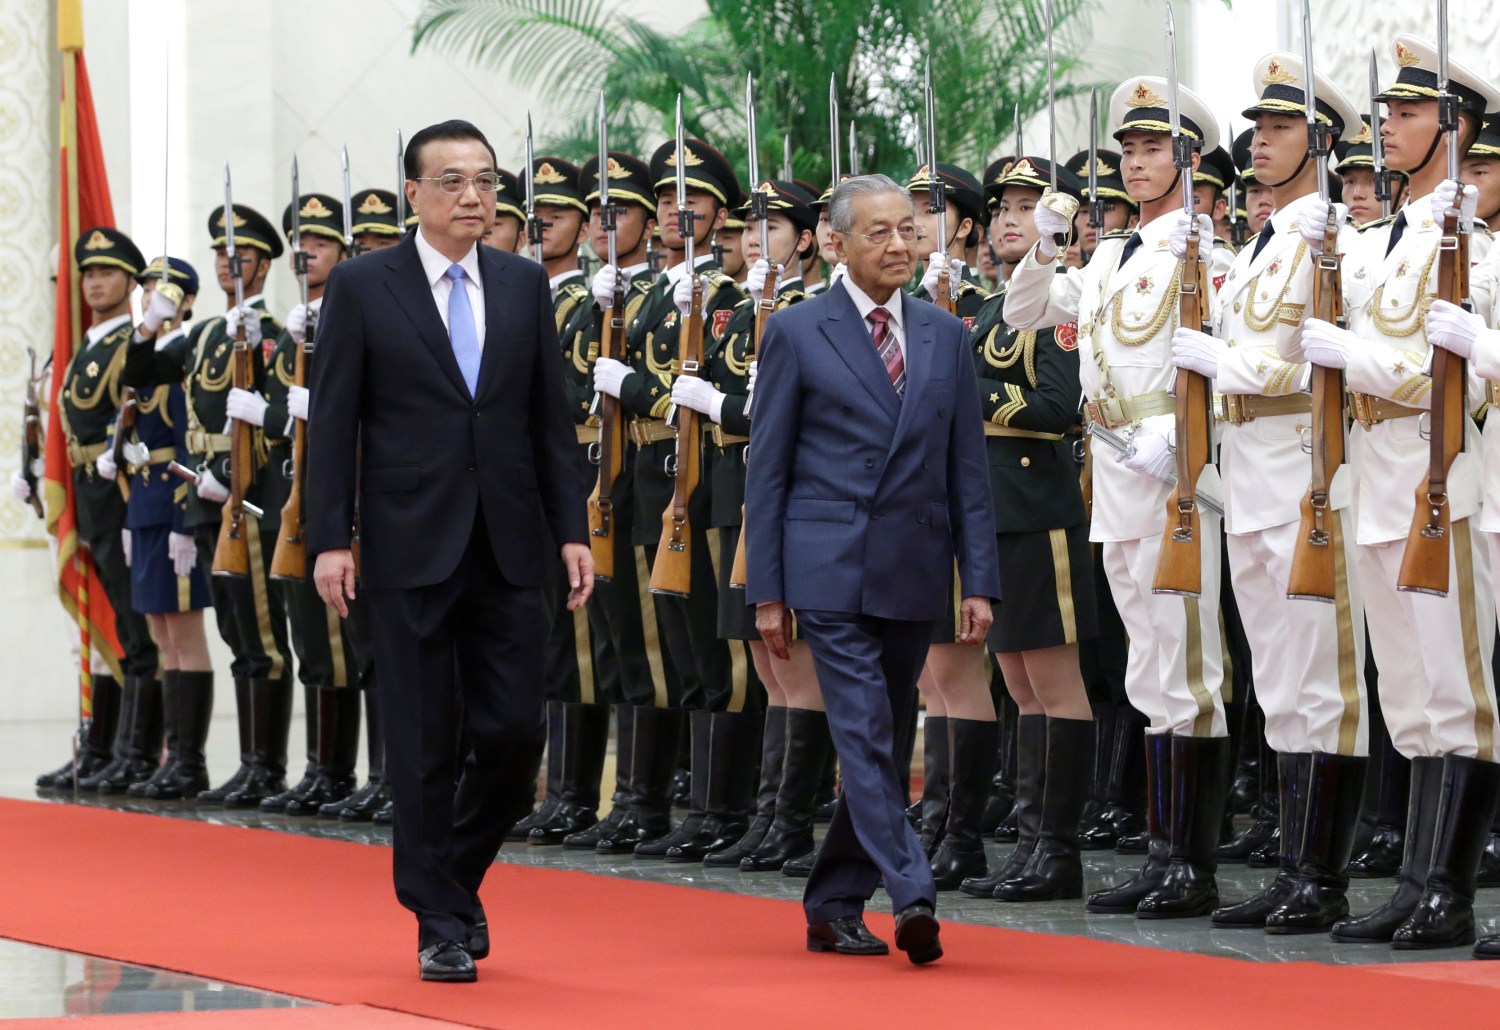 Malaysian Prime Minister Mahathir Mohamad (R) and China's Premier Li Keqiang attend a welcome ceremony at the Great Hall of the People in Beijing, China August 20, 2018. REUTERS/Jason Lee - RC1385E2CB30